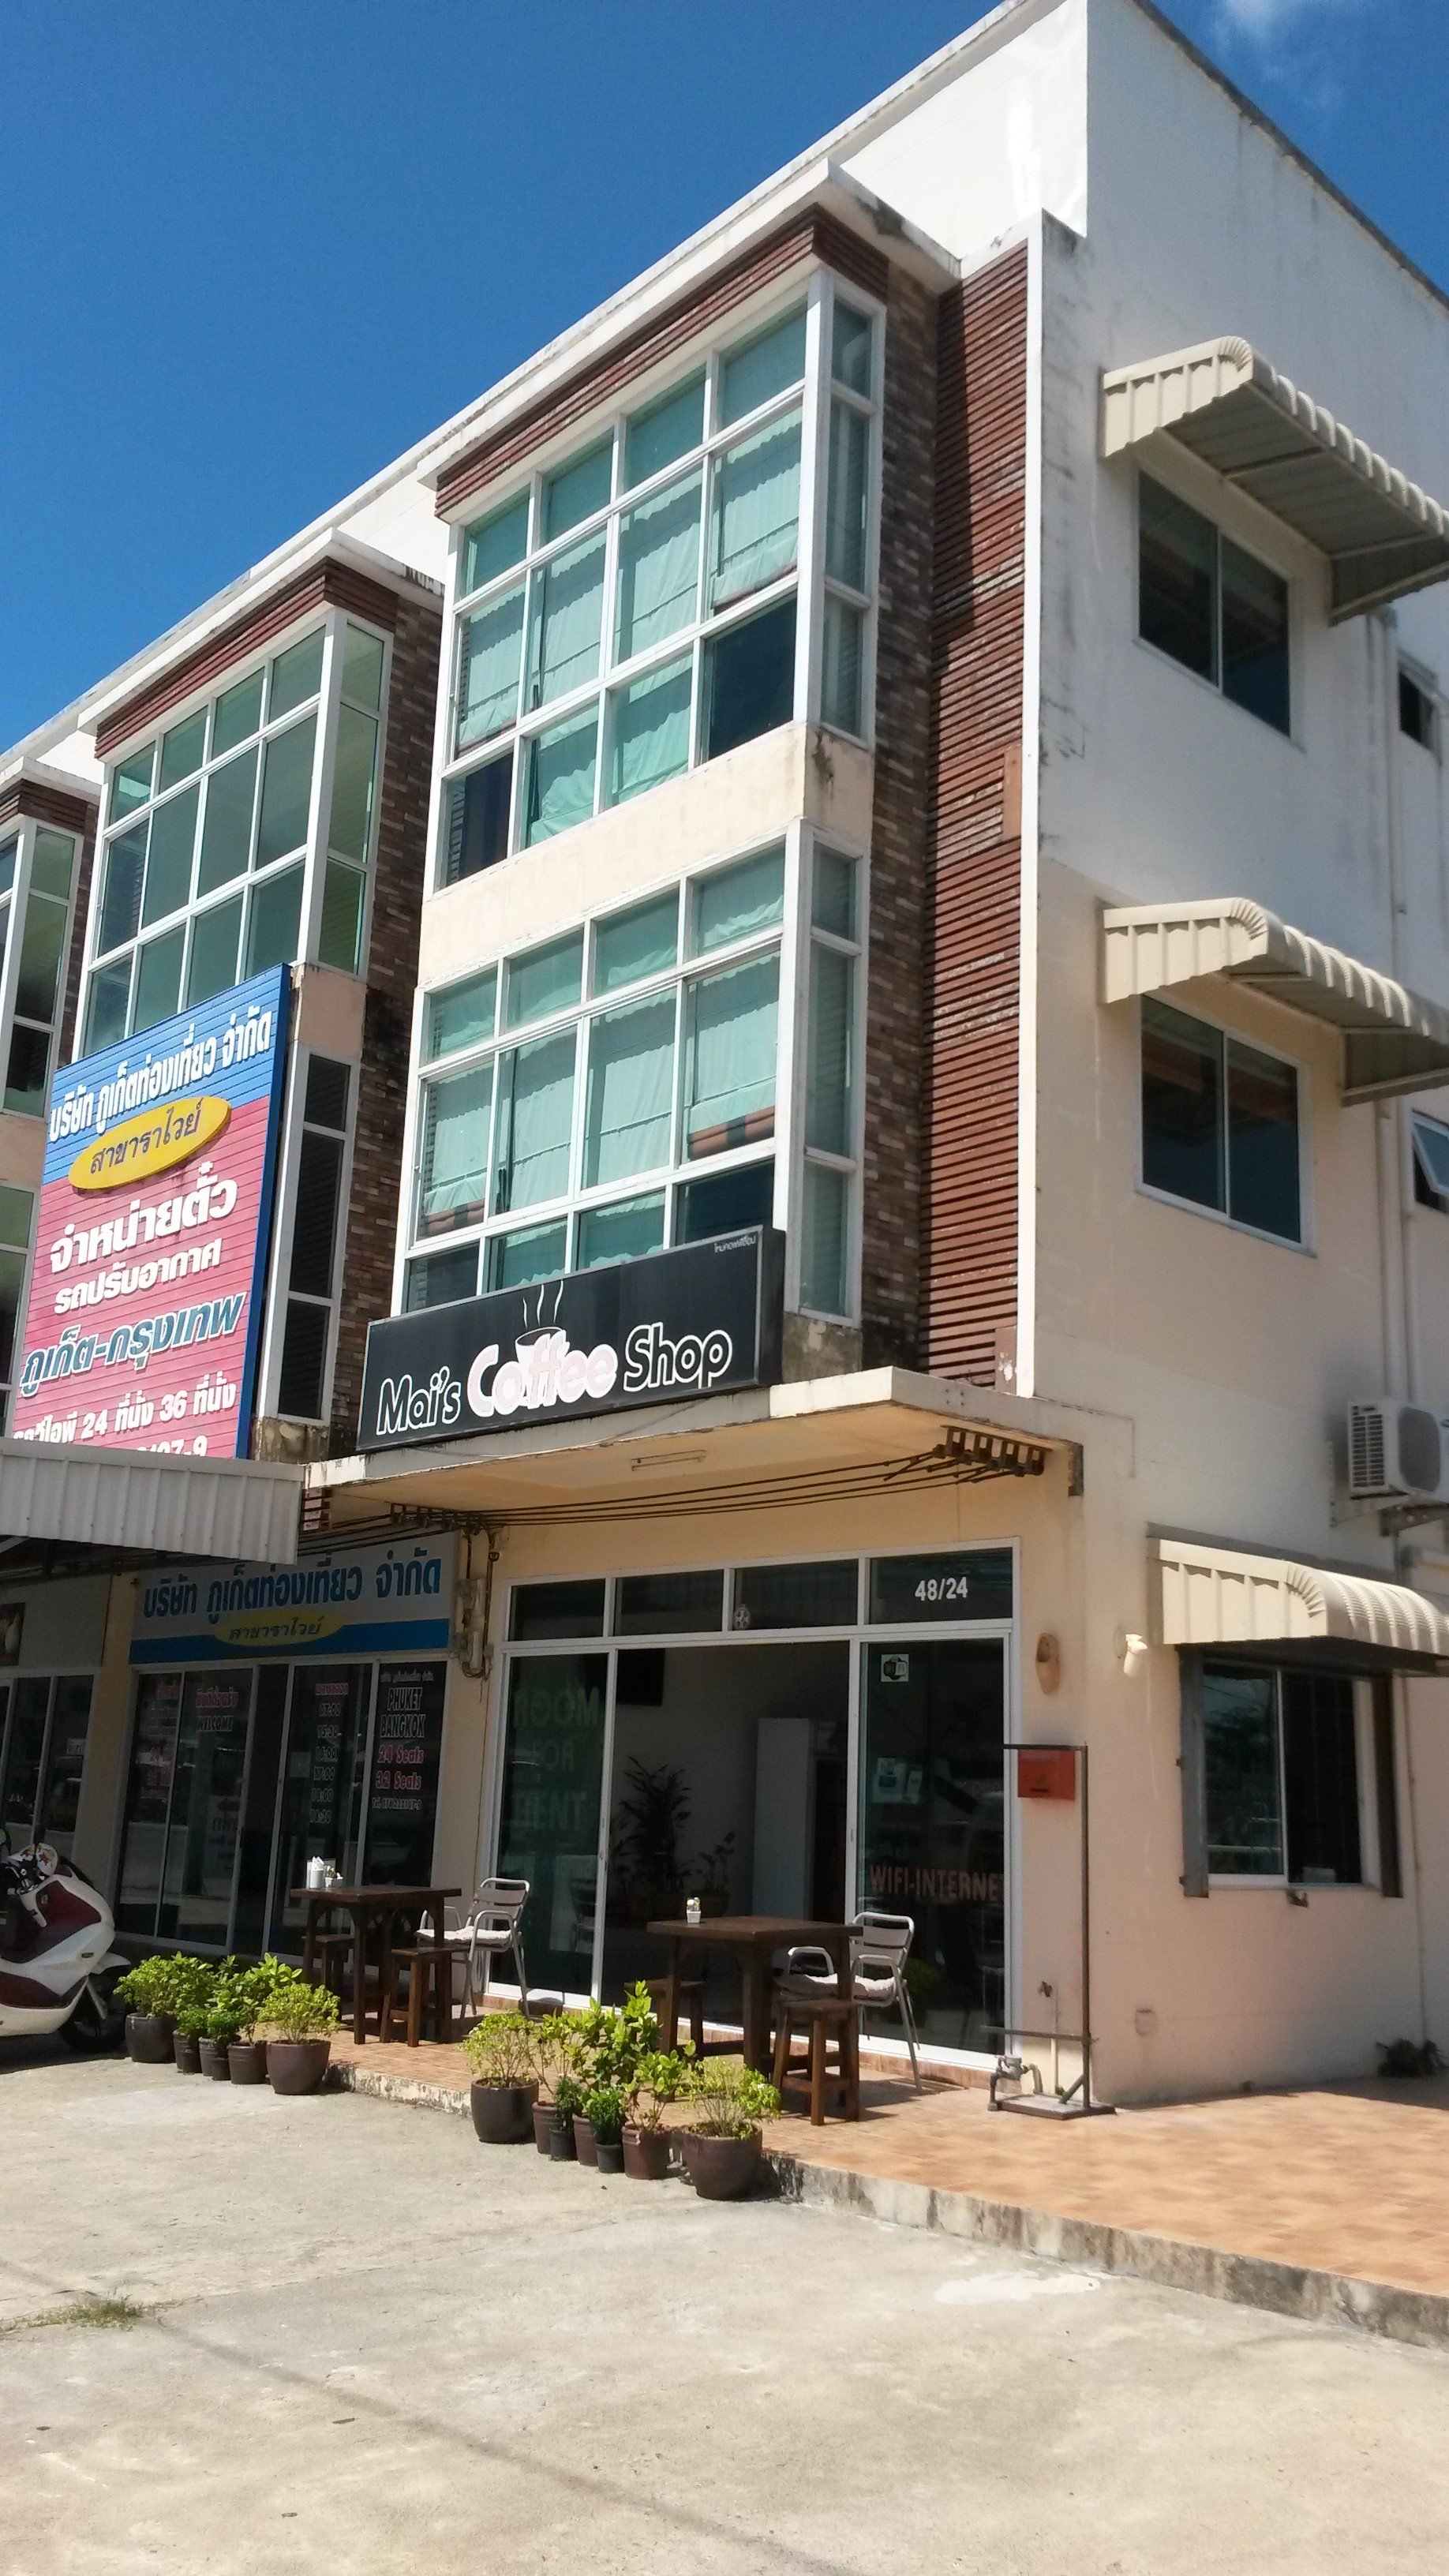 Guest house and coffee shop in Rawai Phuket